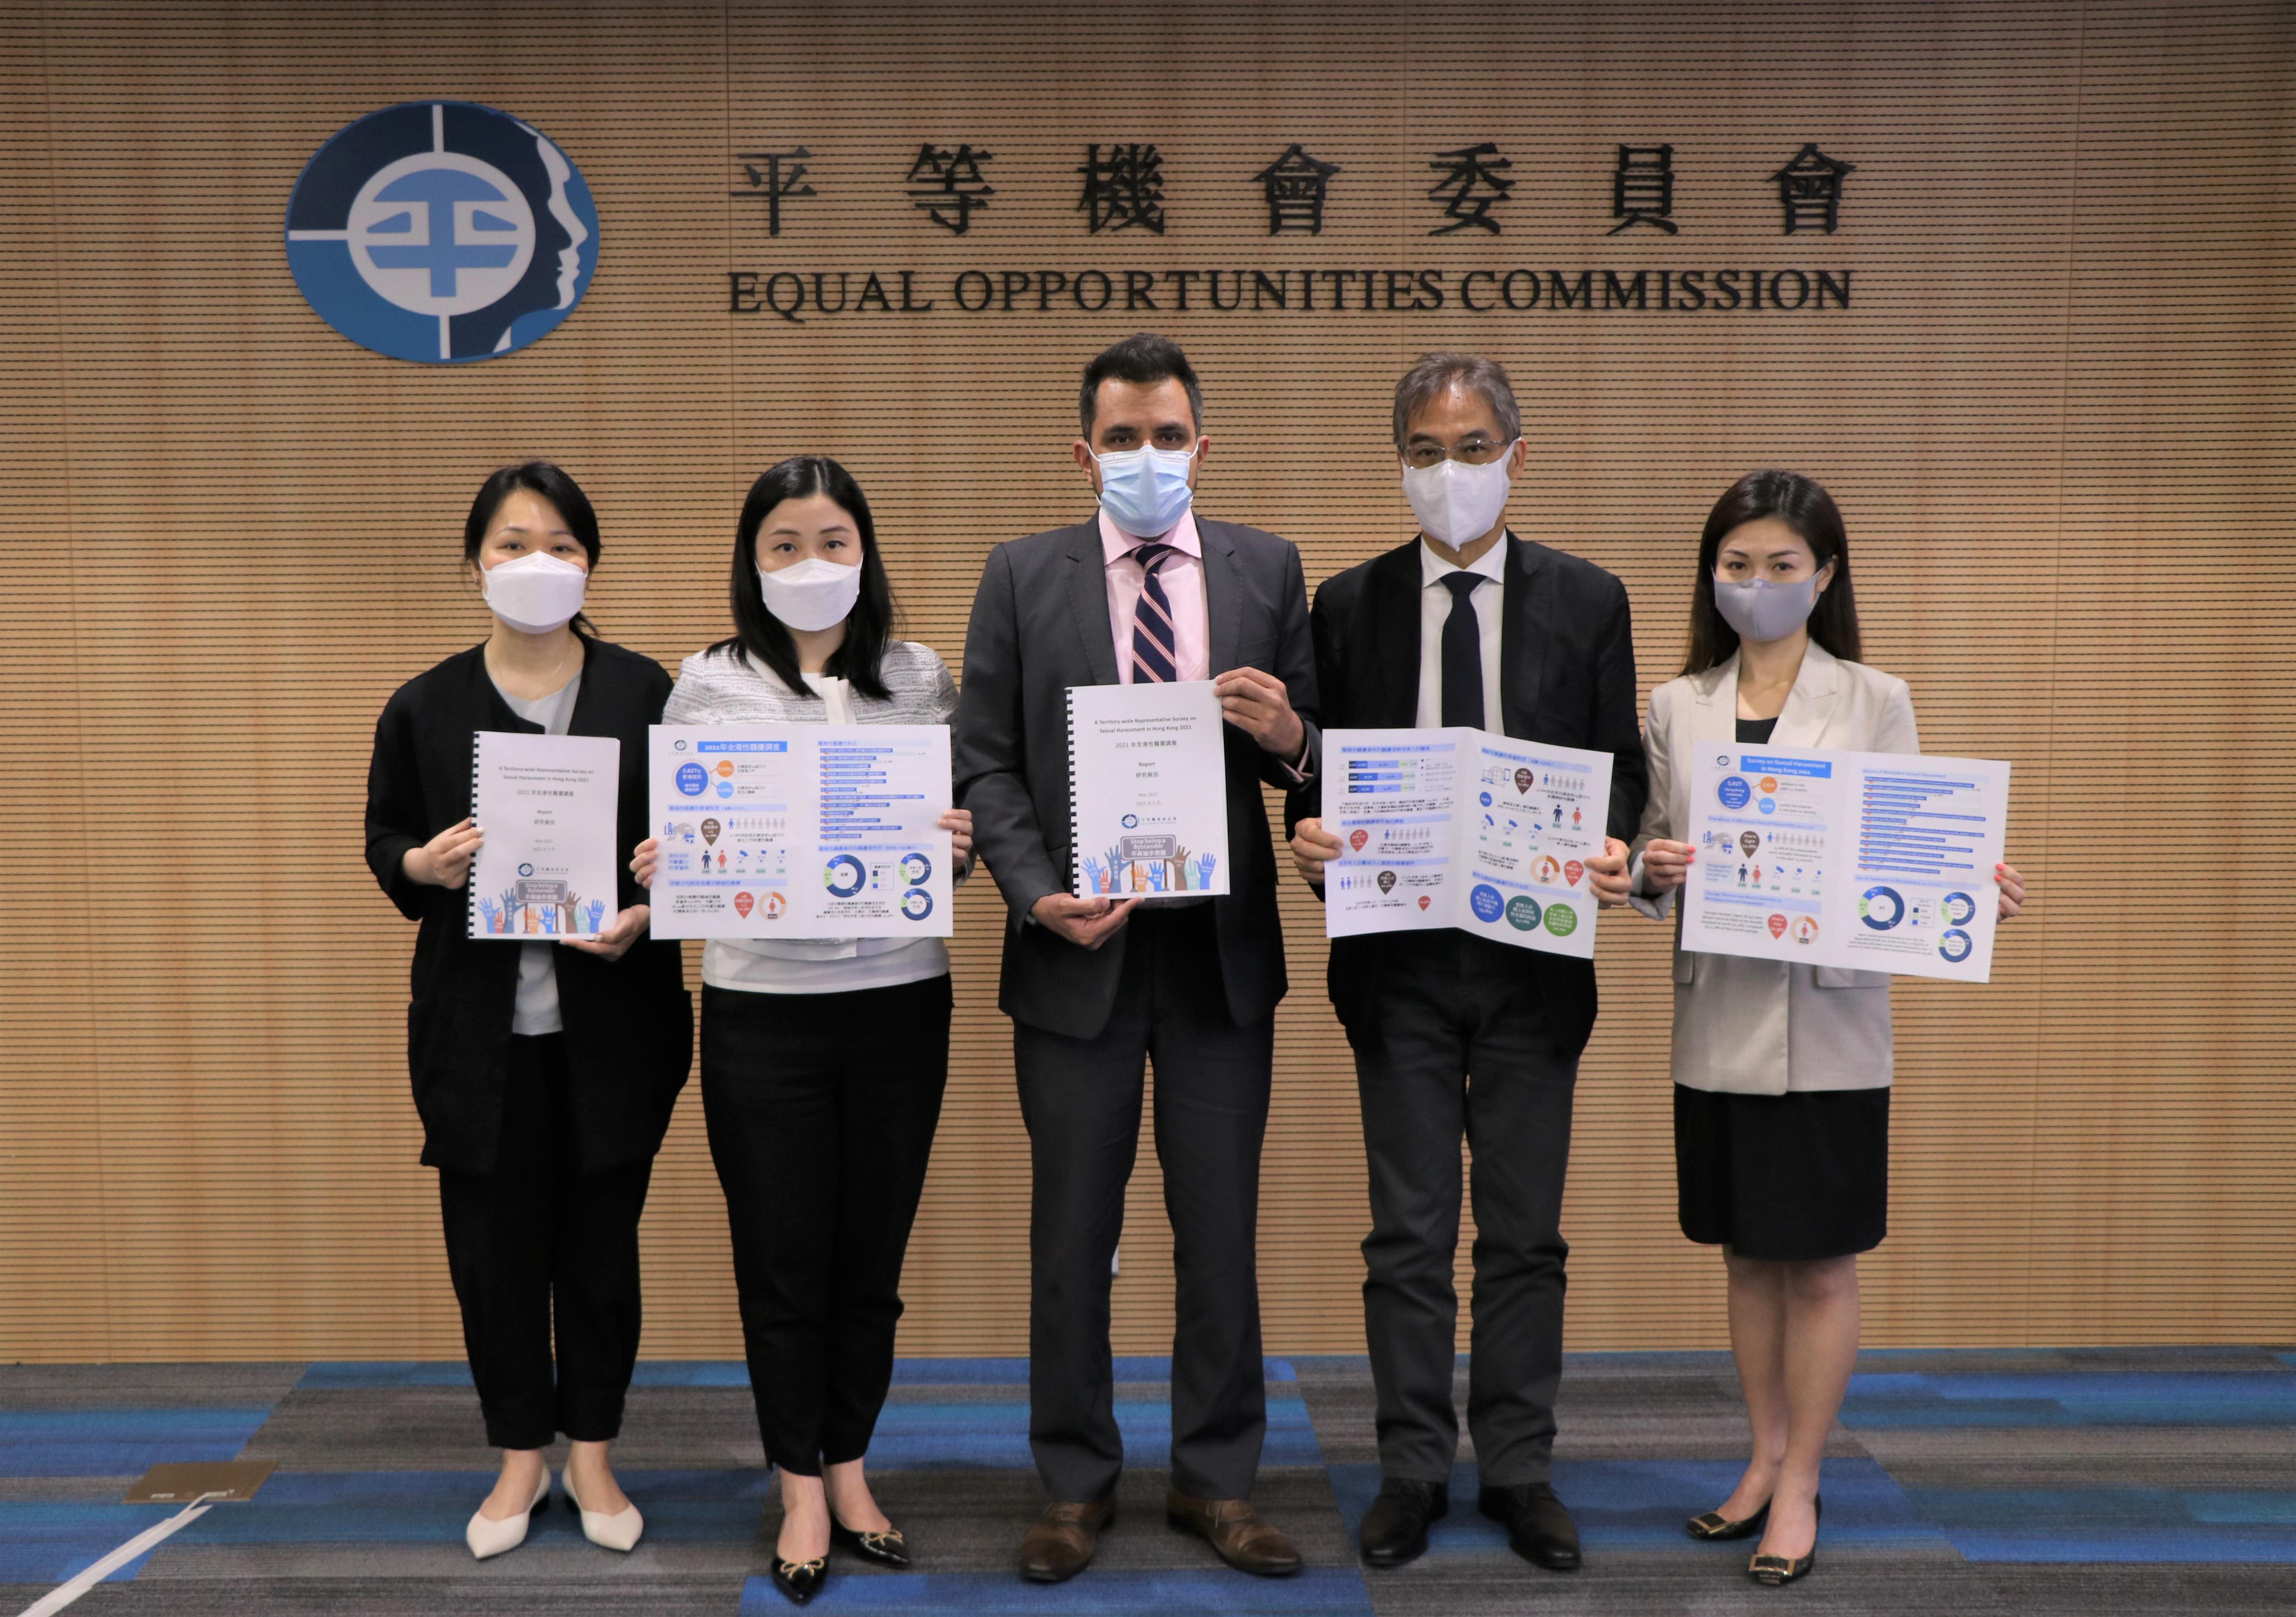 (From left) Dr Joanne IP Chung-yan, Senior Research Manager; Ms Doris TSUI Ue-ting, Acting Head (Policy, Research and Training); Dr Rizwan ULLAH, Convenor of the Policy, Research and Training Committee; Dr Ferrick CHU Chung-man, Executive Director (Operations); and Ms Susana SOO, Senior Equal Opportunity Officer (Anti-Sexual Harassment Unit) from the EOC presented the findings of the “Territory-wide Representative Survey on Sexual Harassment in Hong Kong 2021” at the press conference.